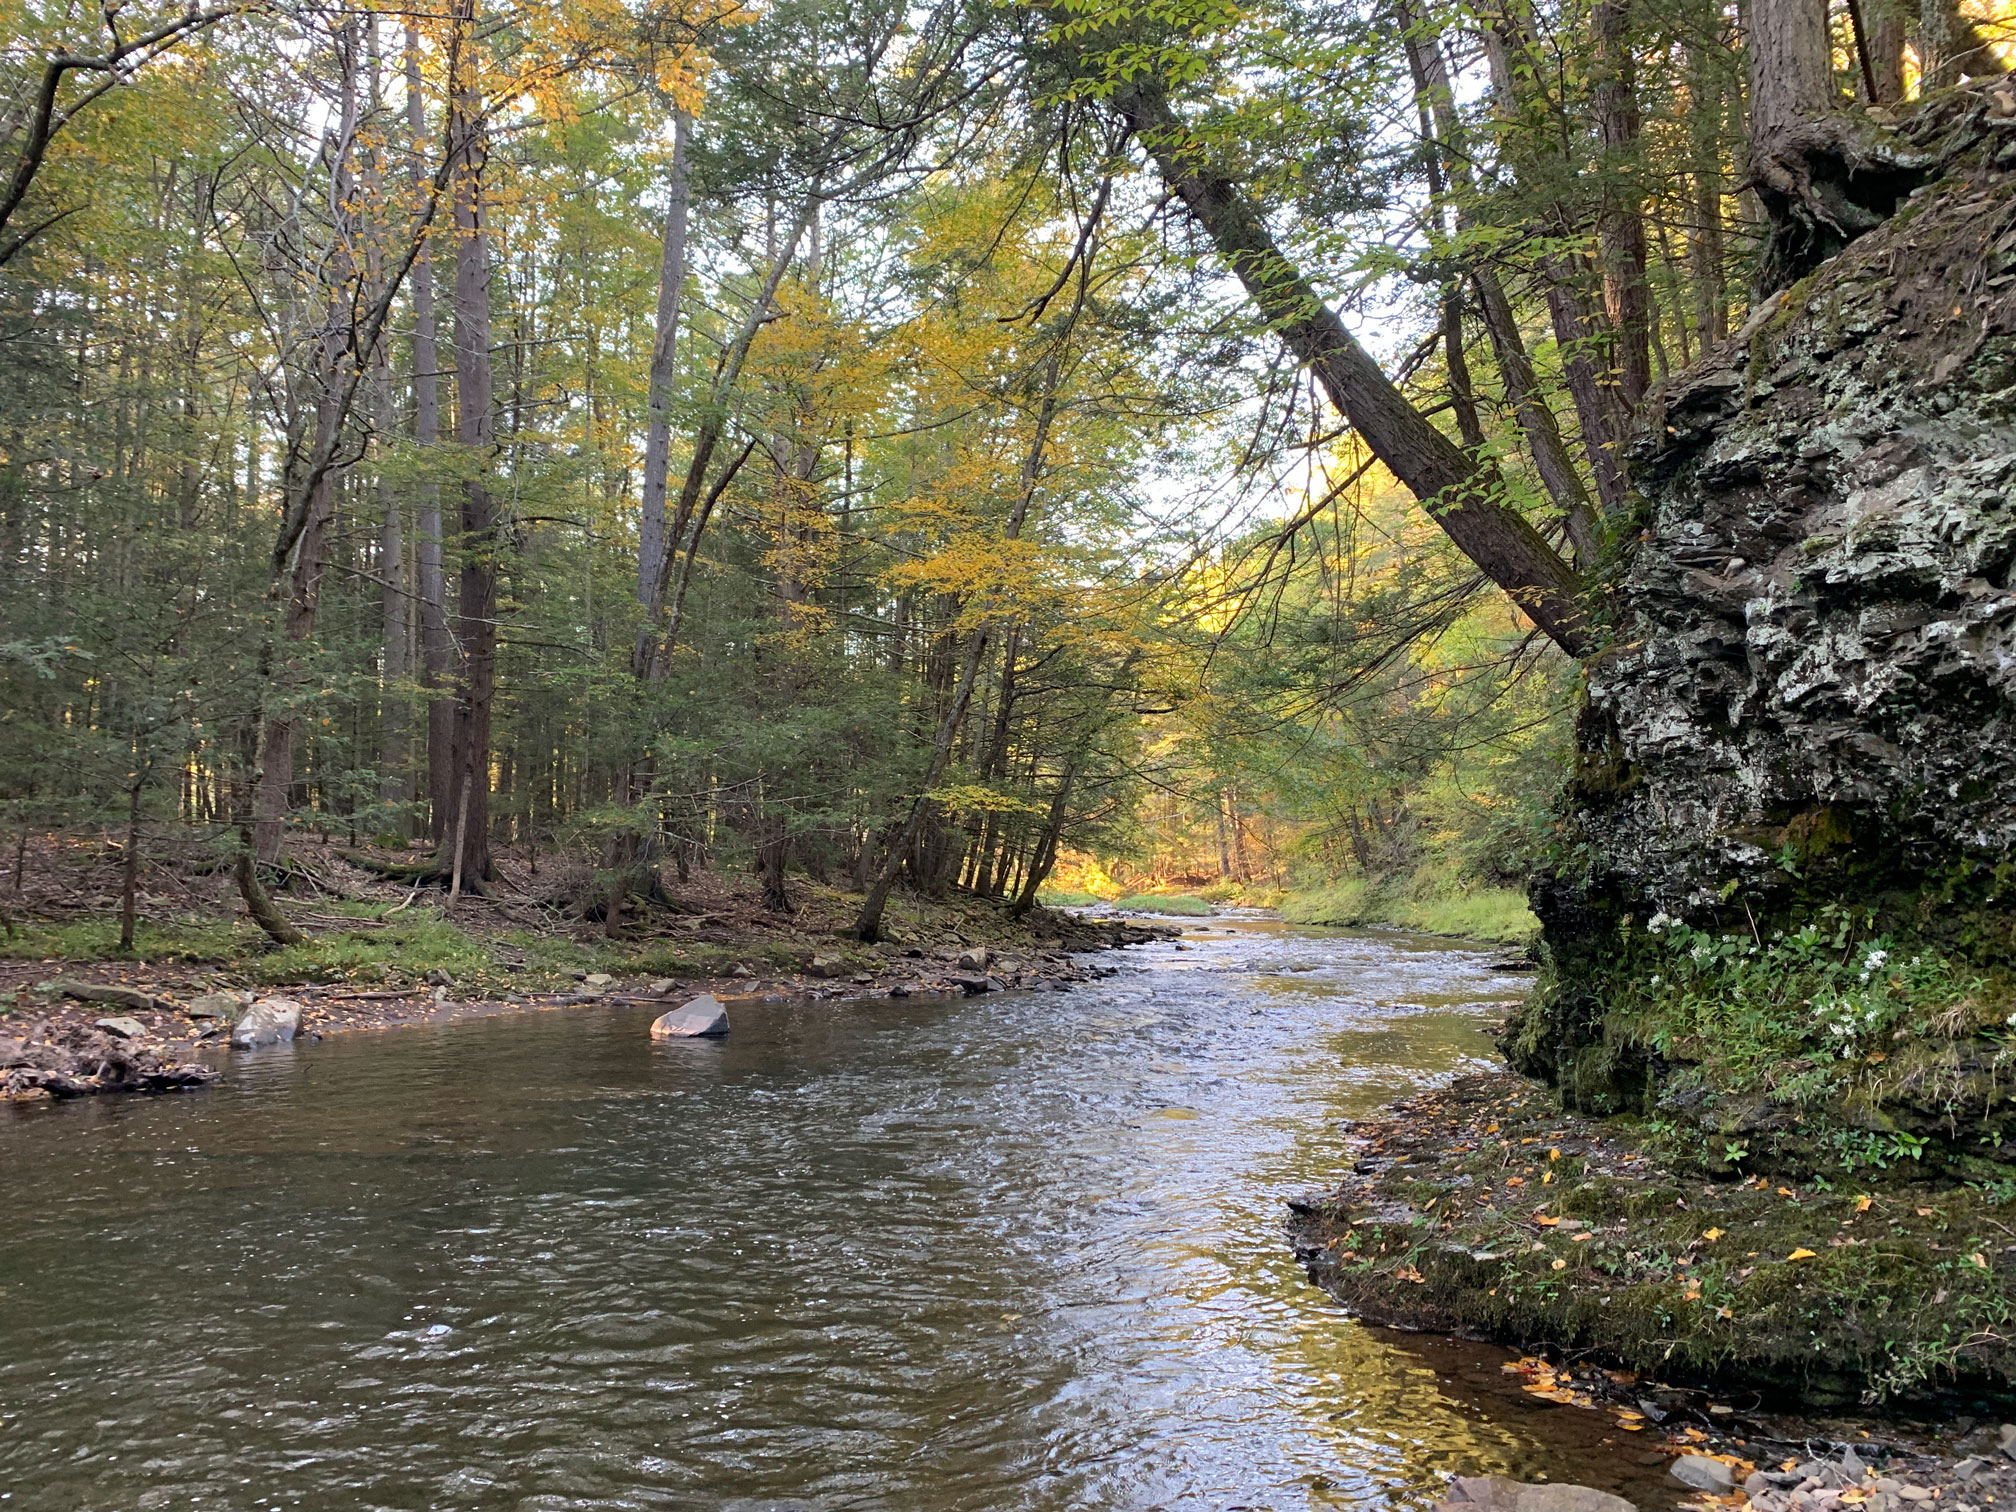 “It’s mostly sloping down to some frontage on Platekill Creek where there’s a great swimming hole that my kids love,” Graham says of the property. “I used the term ‘forest bathing’ a lot to describe why I like to spend time there.” Photo courtesy of Armand Graham